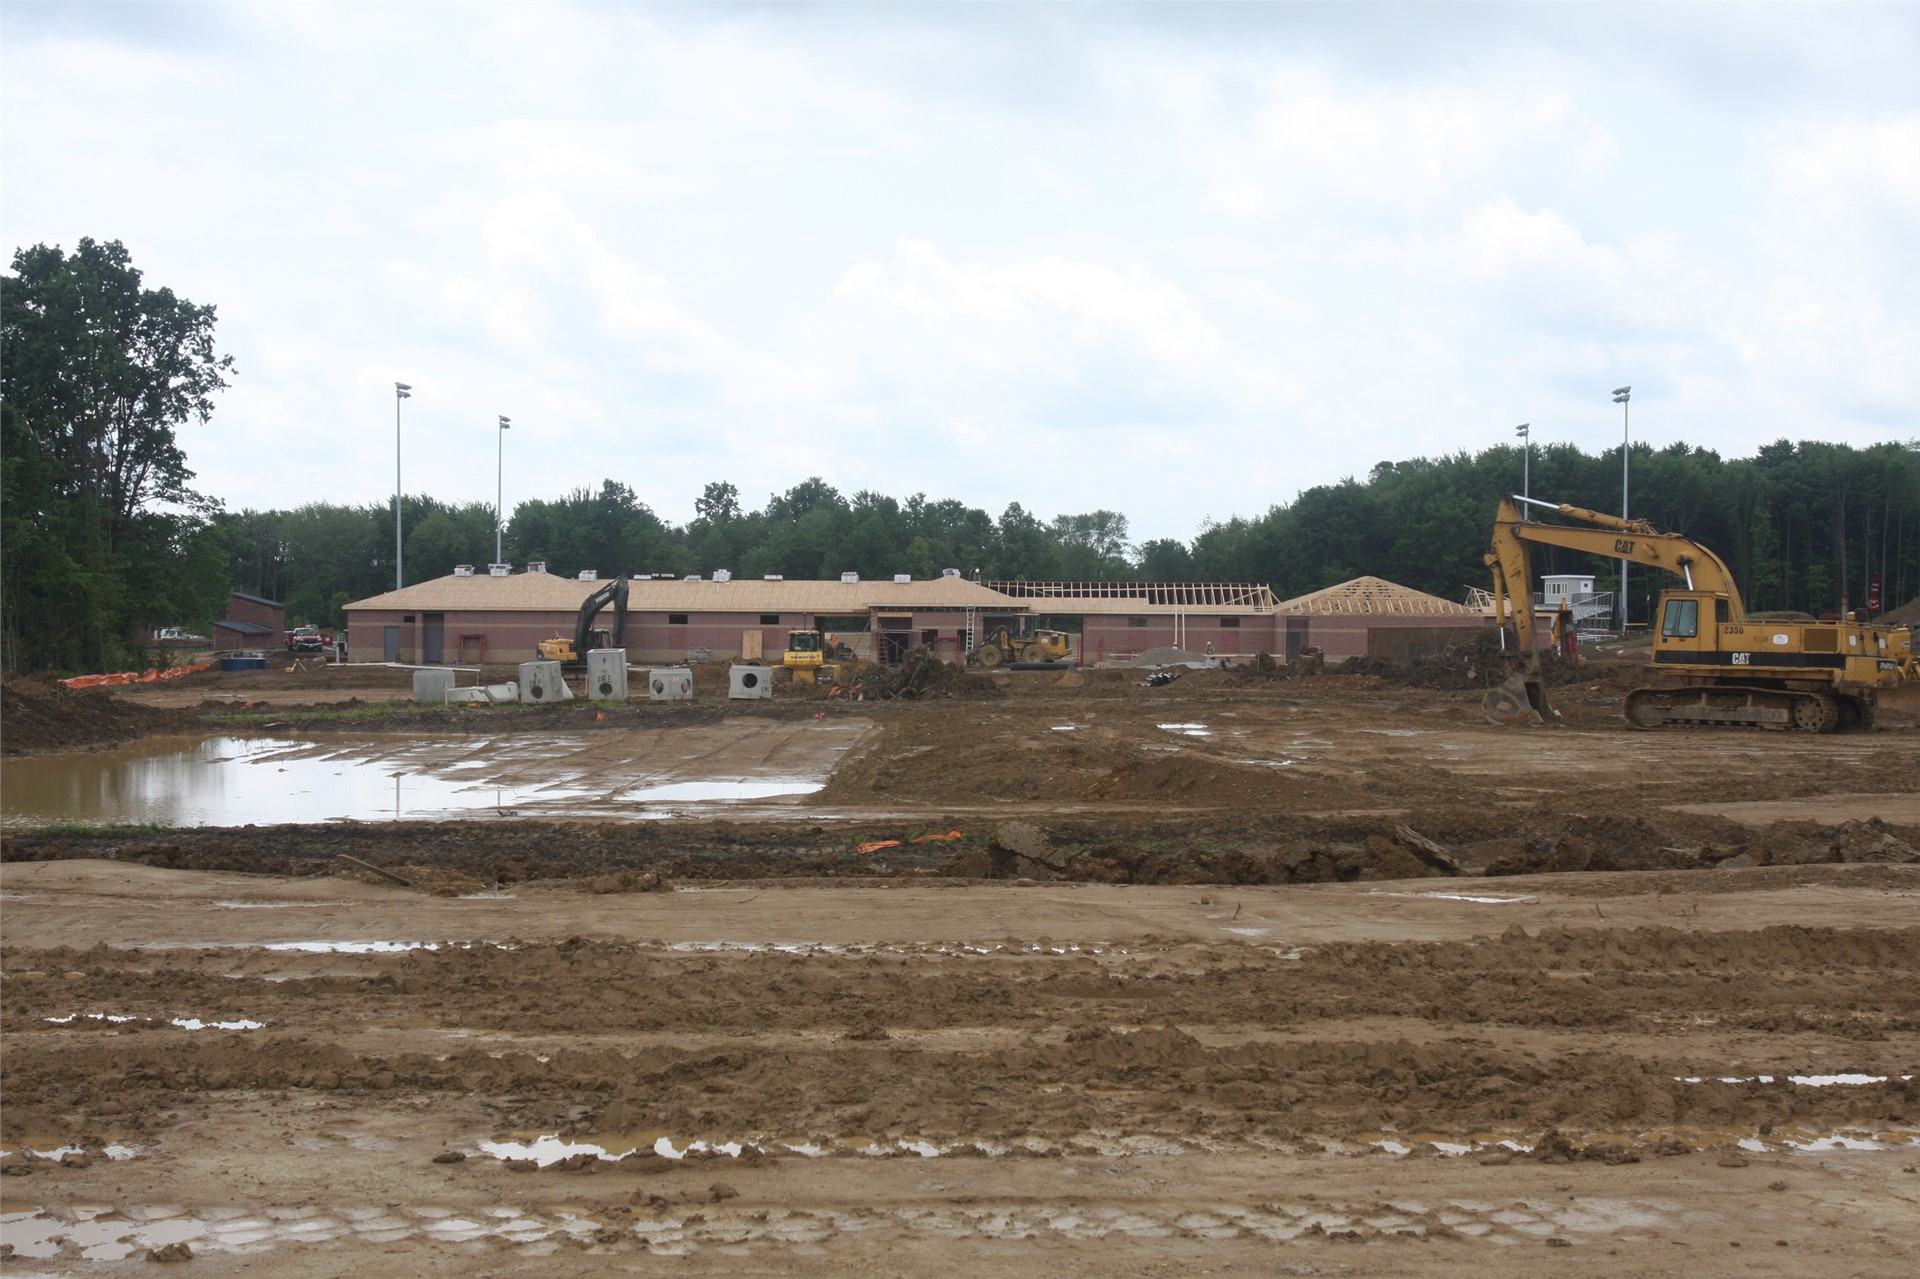 View of stadium from the main entrance of the high school (pad for parking lot is taking shape)